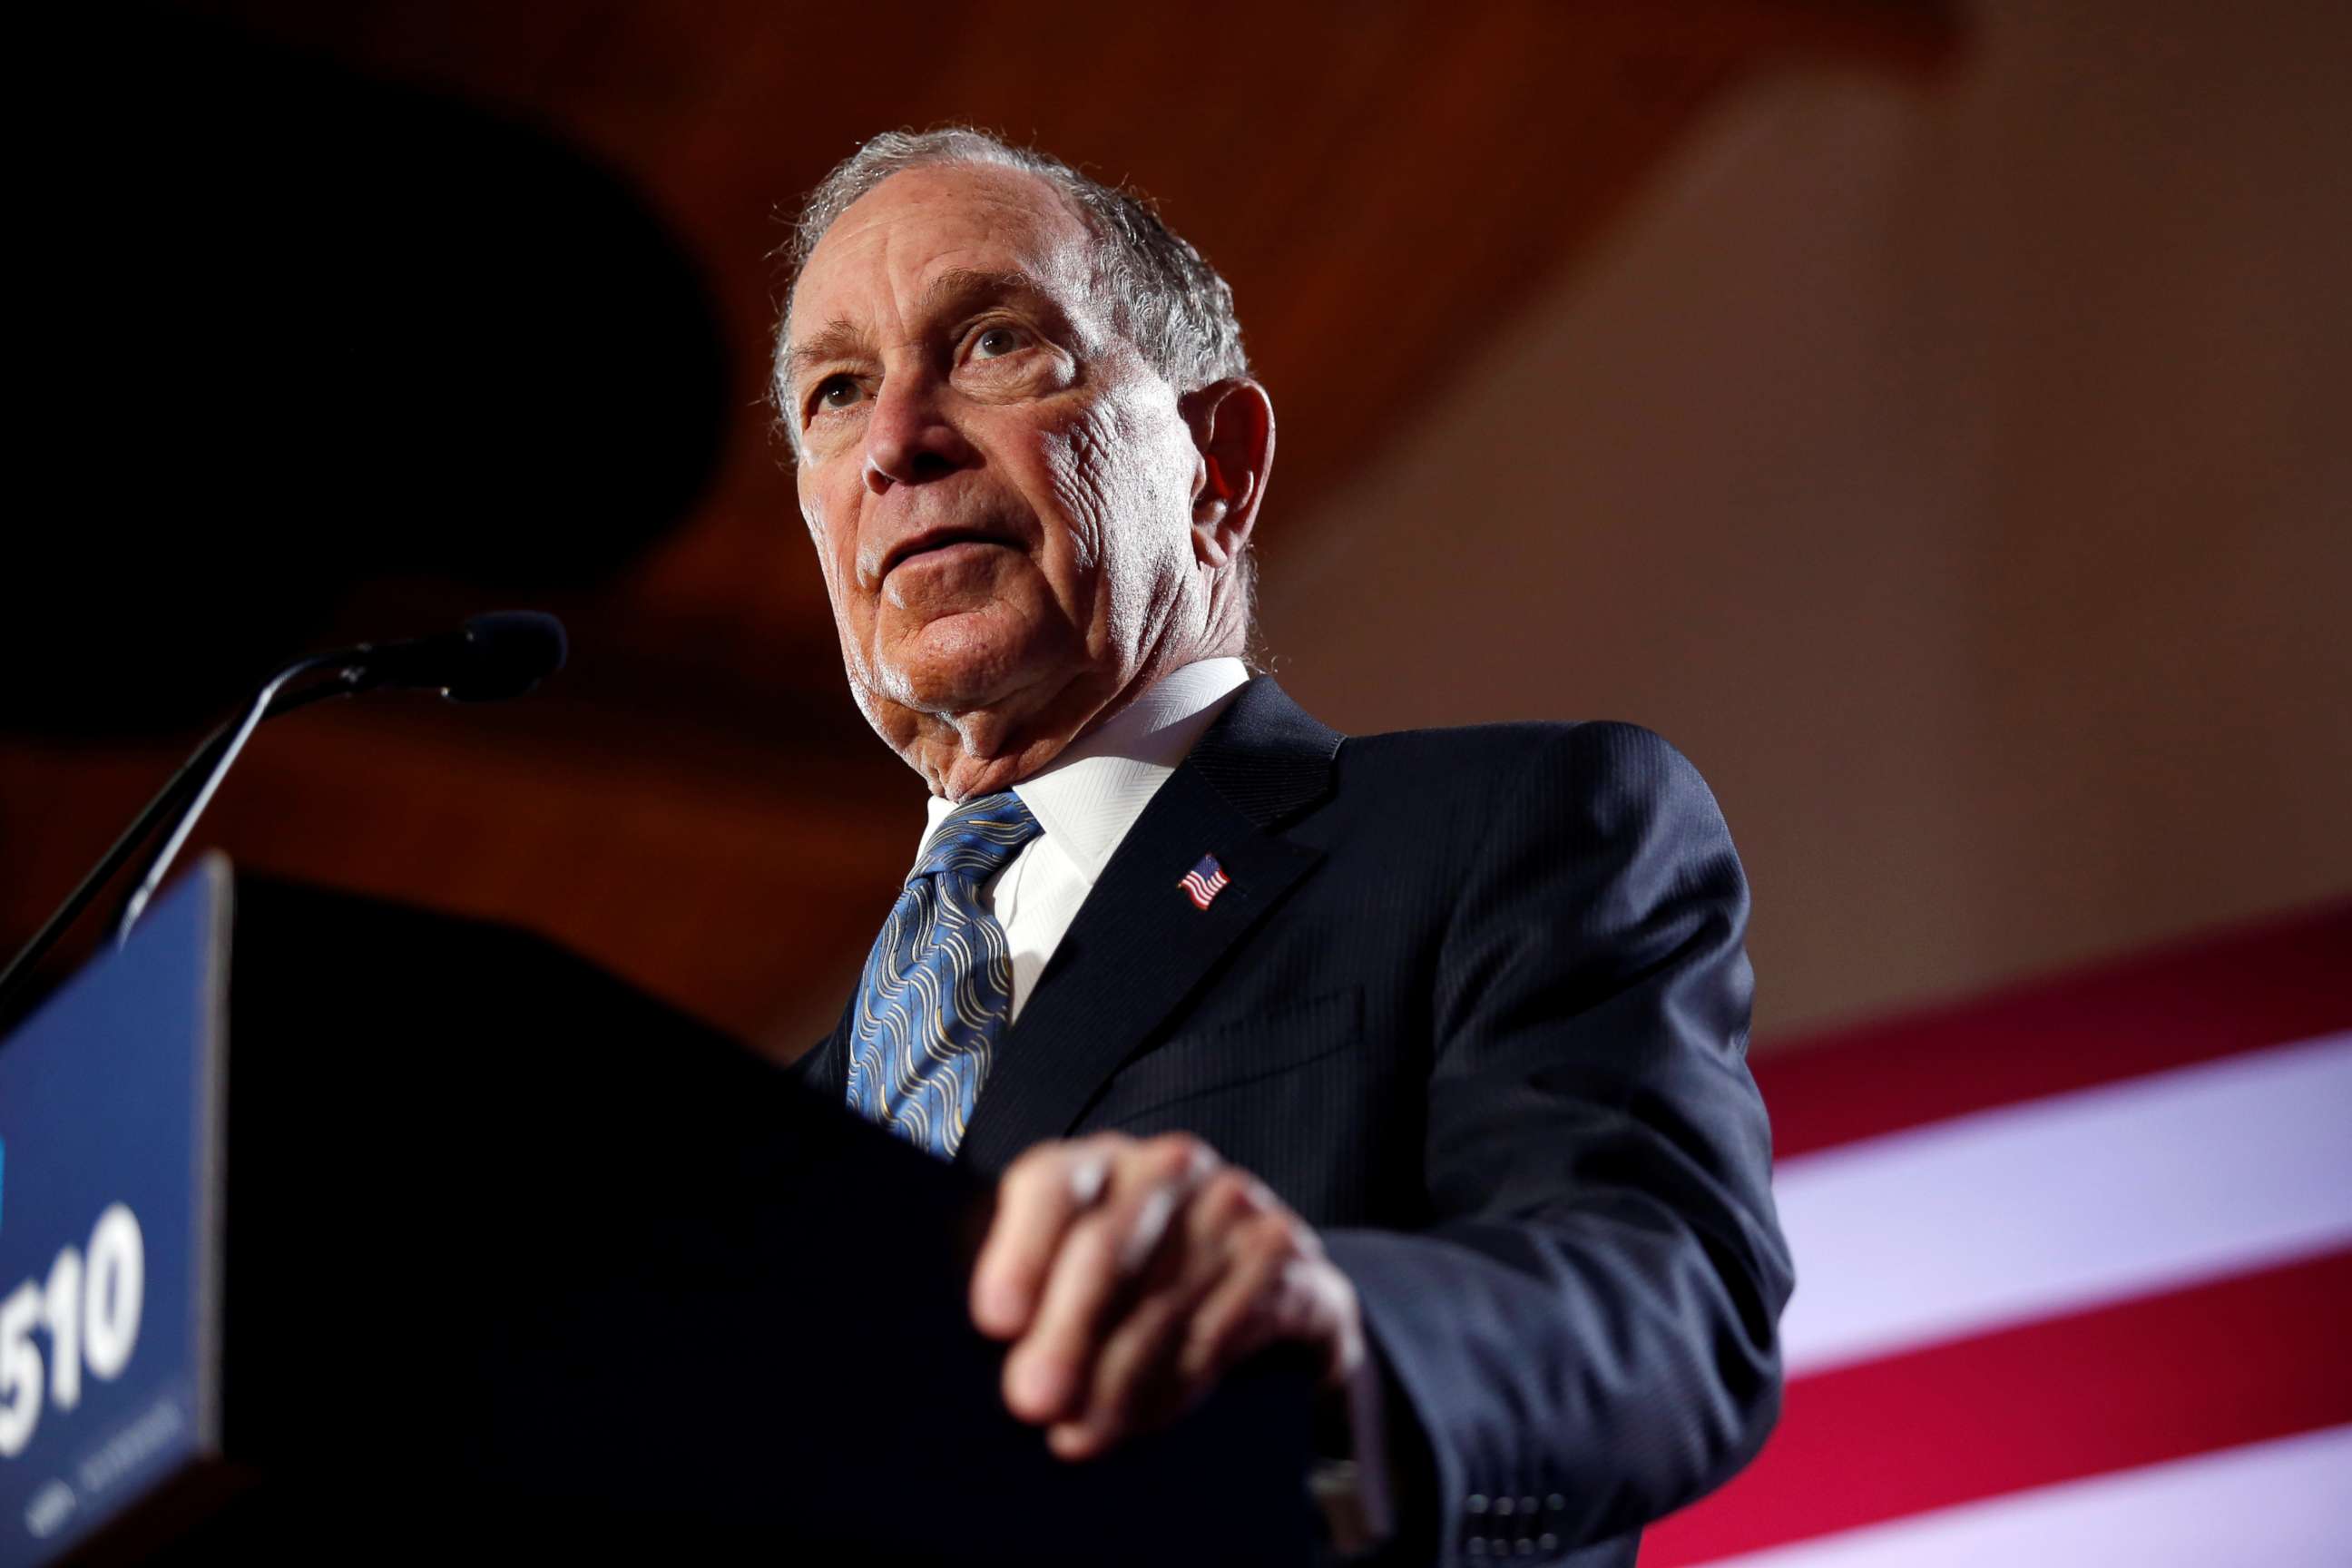 PHOTO: Democratic presidential candidate Michael Bloomberg speaks during a campaign event at the Bessie Smith Cultural Center in Chattanooga, Tenn., Feb. 12, 2020.